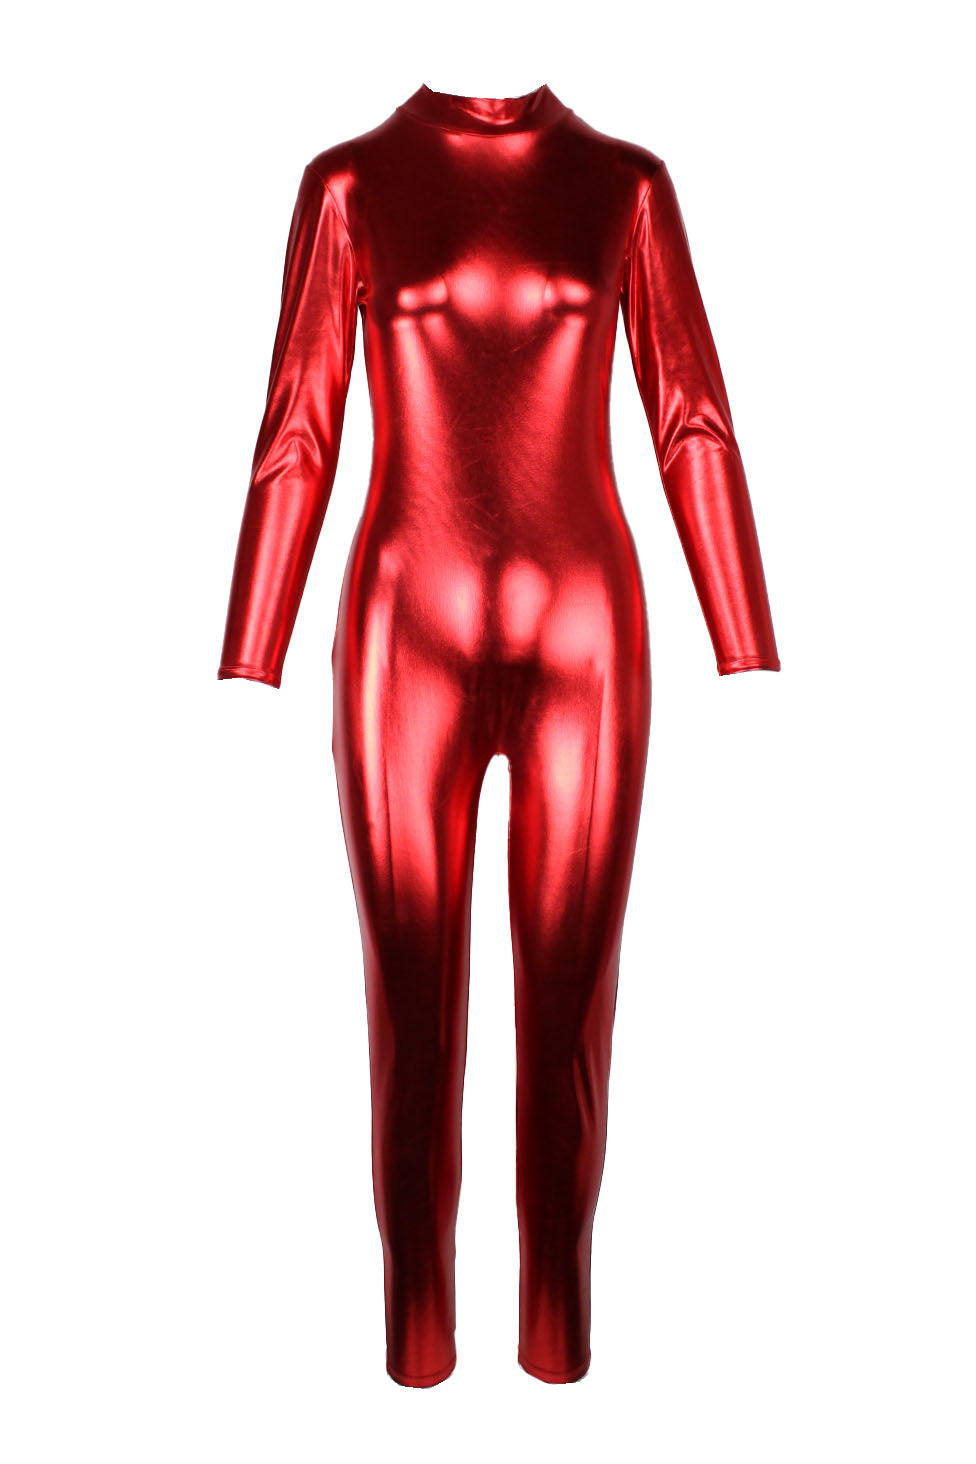 description: speerise red metallic long sleeve unitard. features tall collar, fitted style, and zipper closure at center back. 